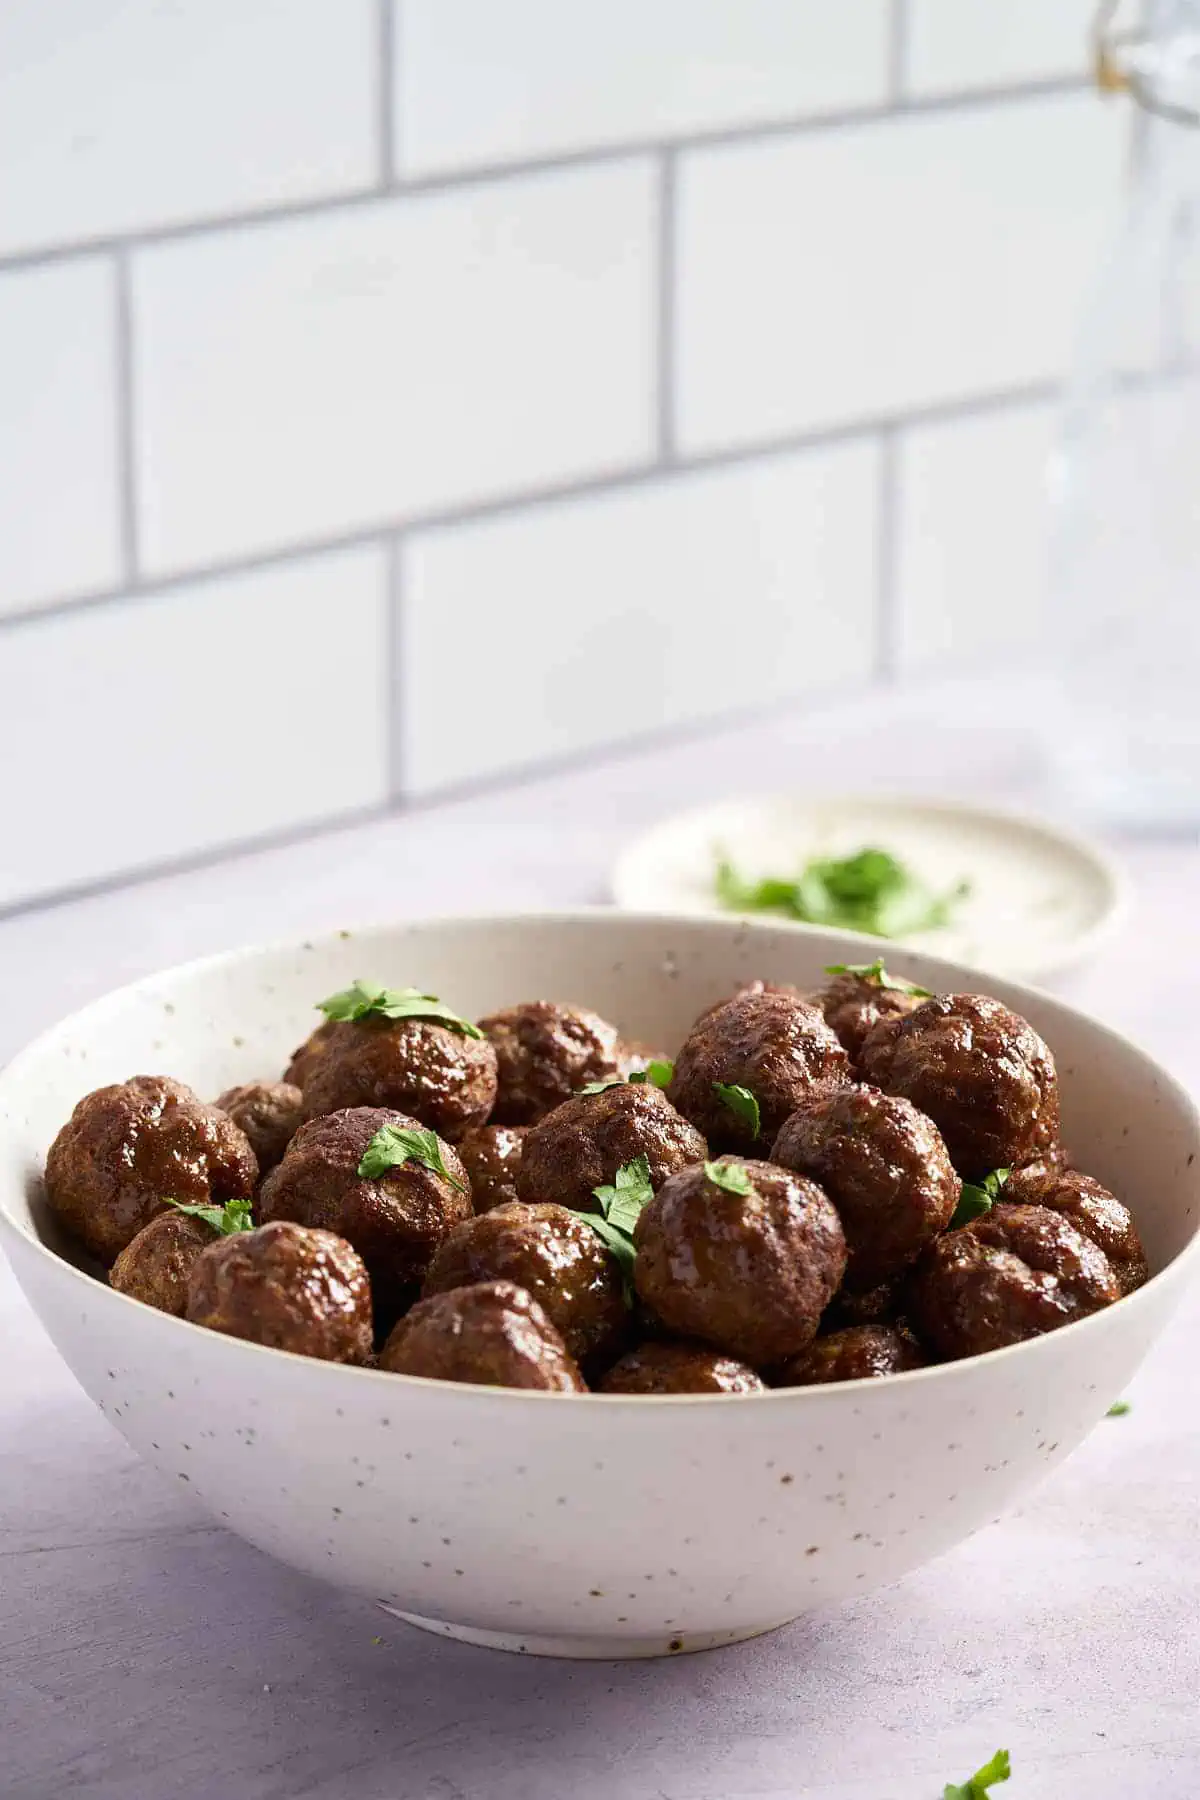 Air-fried meatballs in a bowl garnished with parsley.